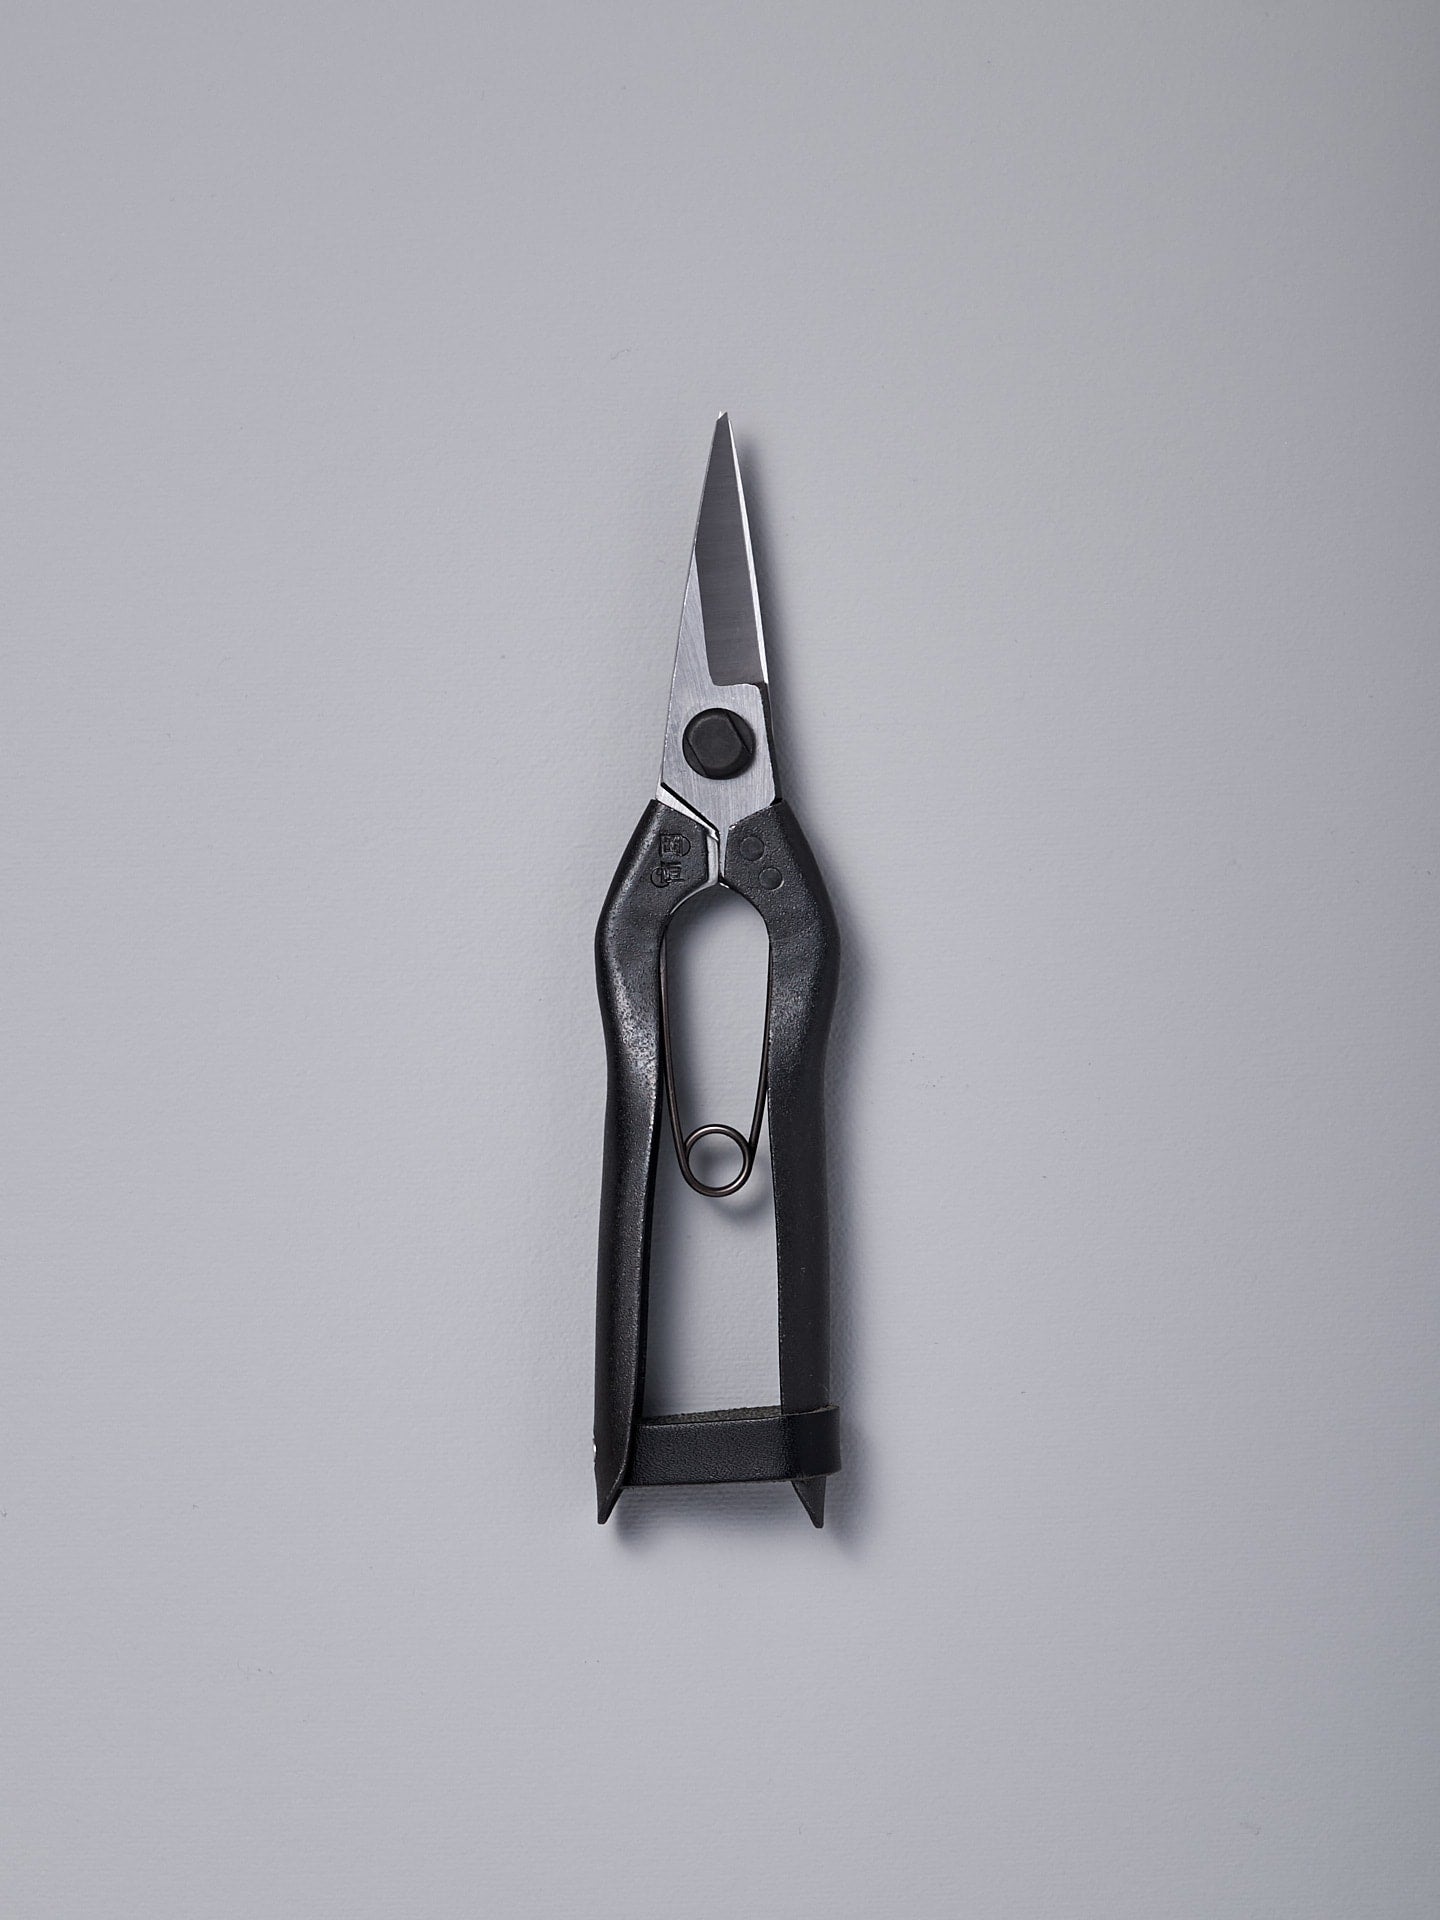 A pair of Okatsune Thinning Shears №207 on a white background.